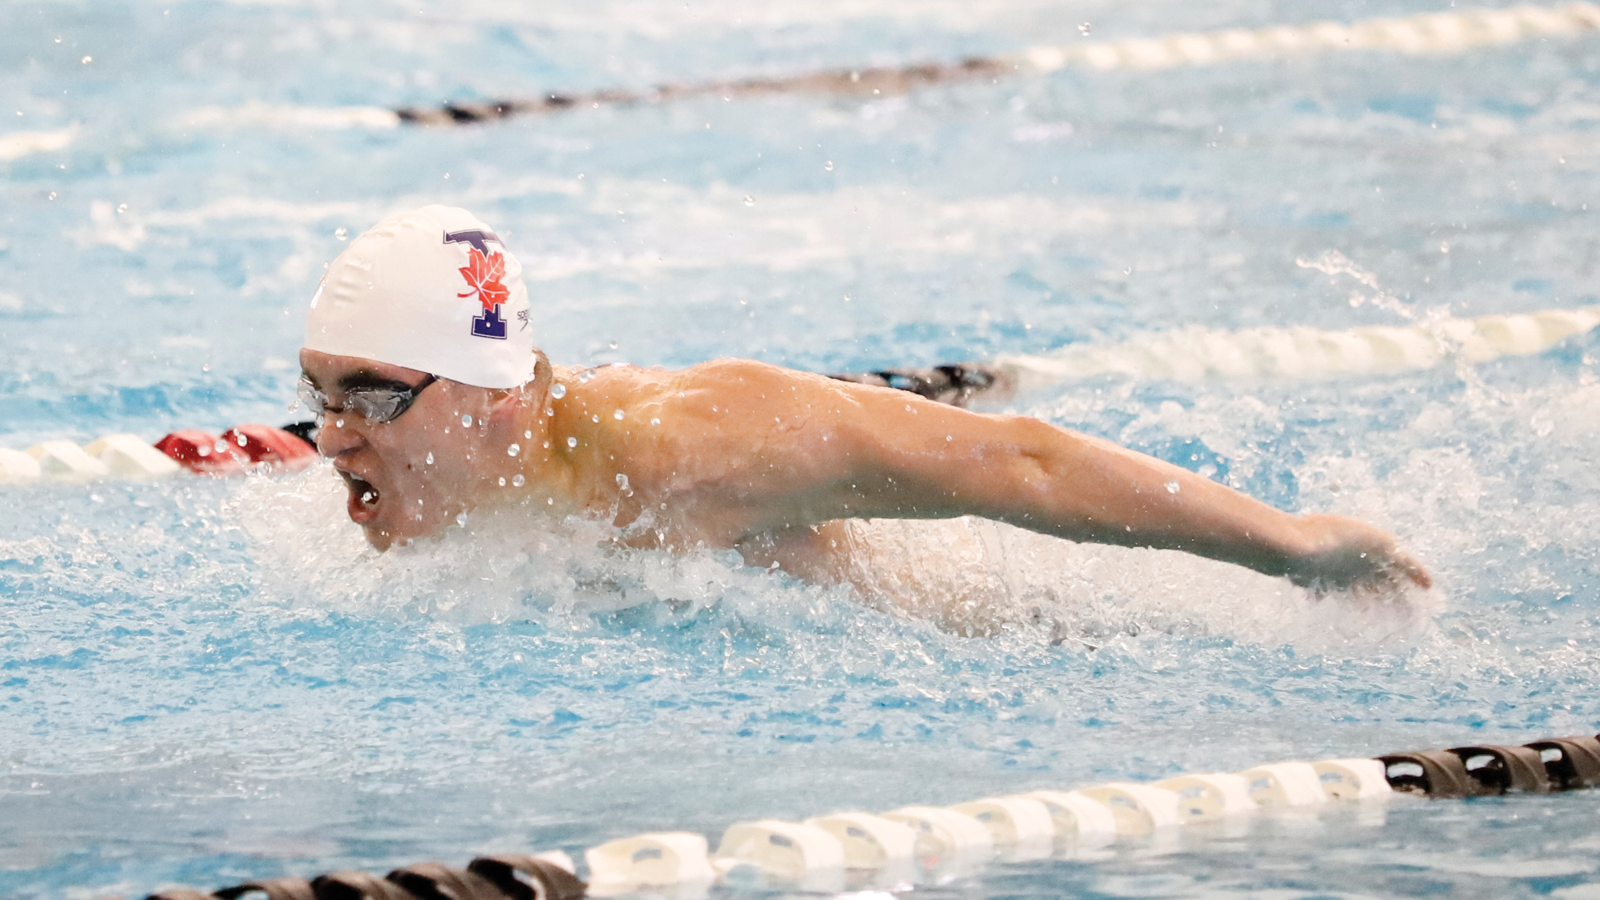 Banner Season: Another dominant day in the pool for the Varsity Blues